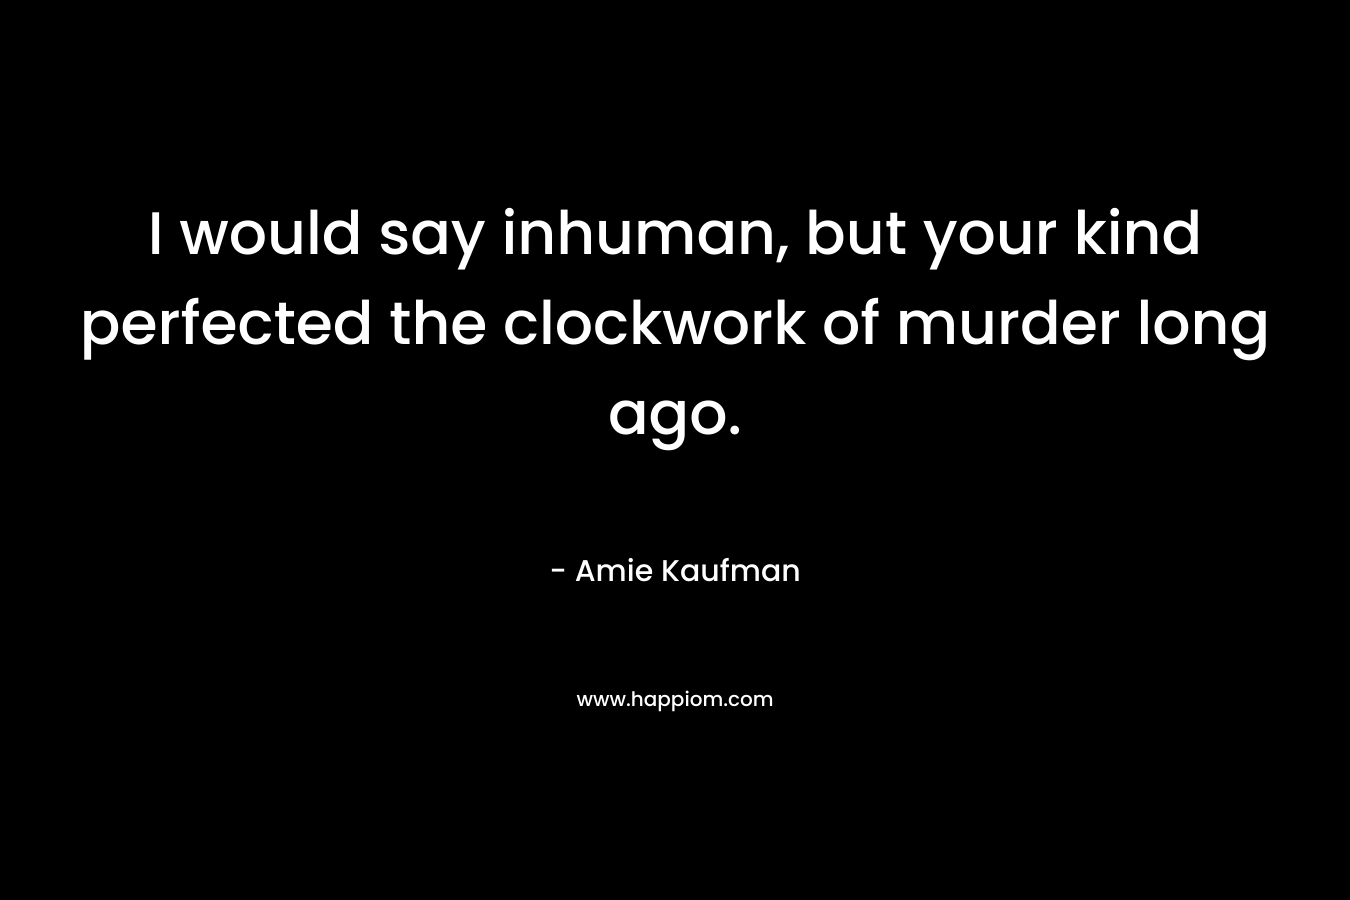 I would say inhuman, but your kind perfected the clockwork of murder long ago. – Amie Kaufman